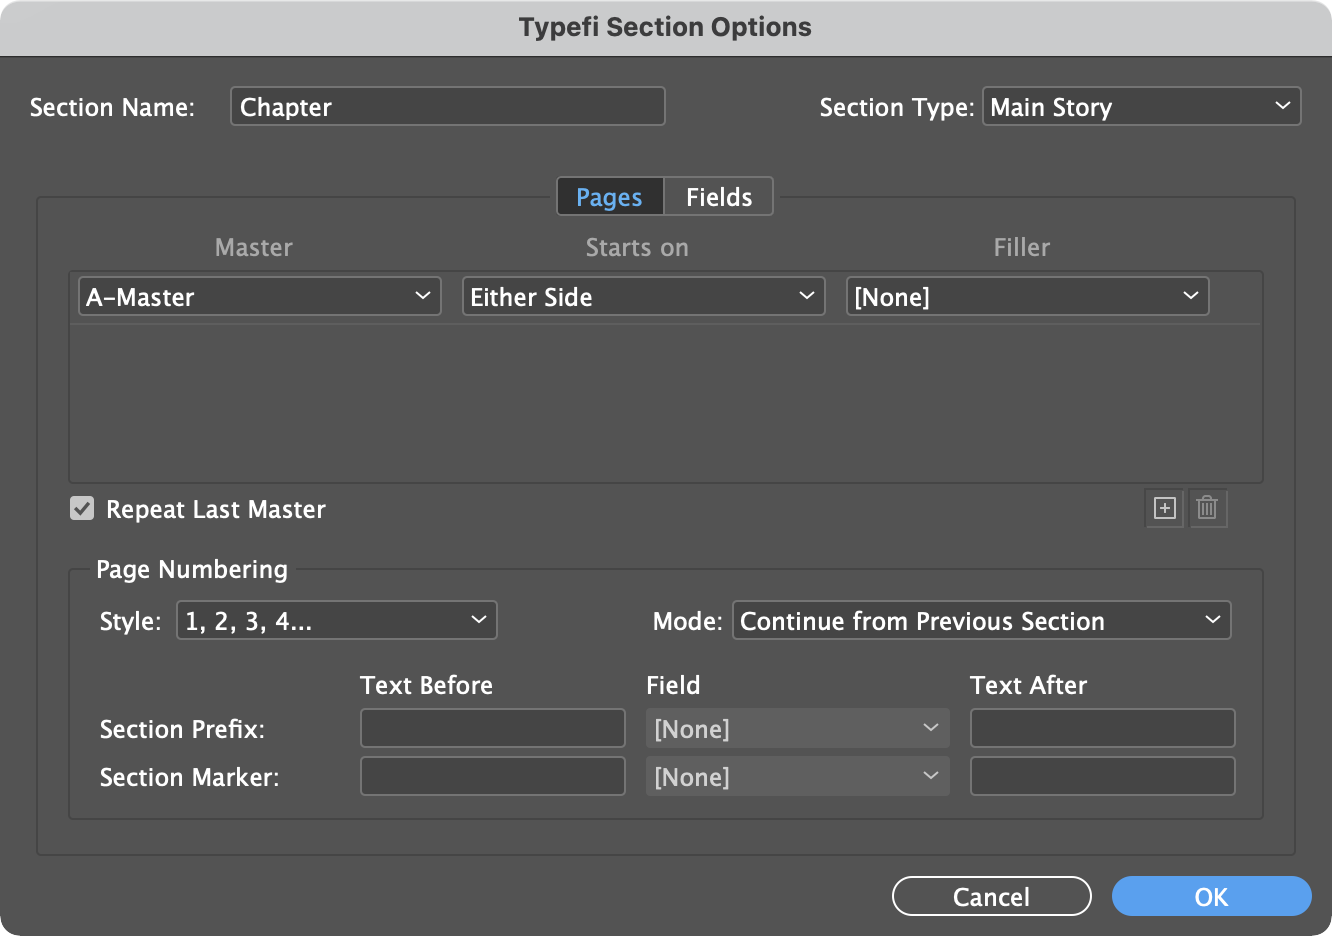 Typefi Section Options dialogues